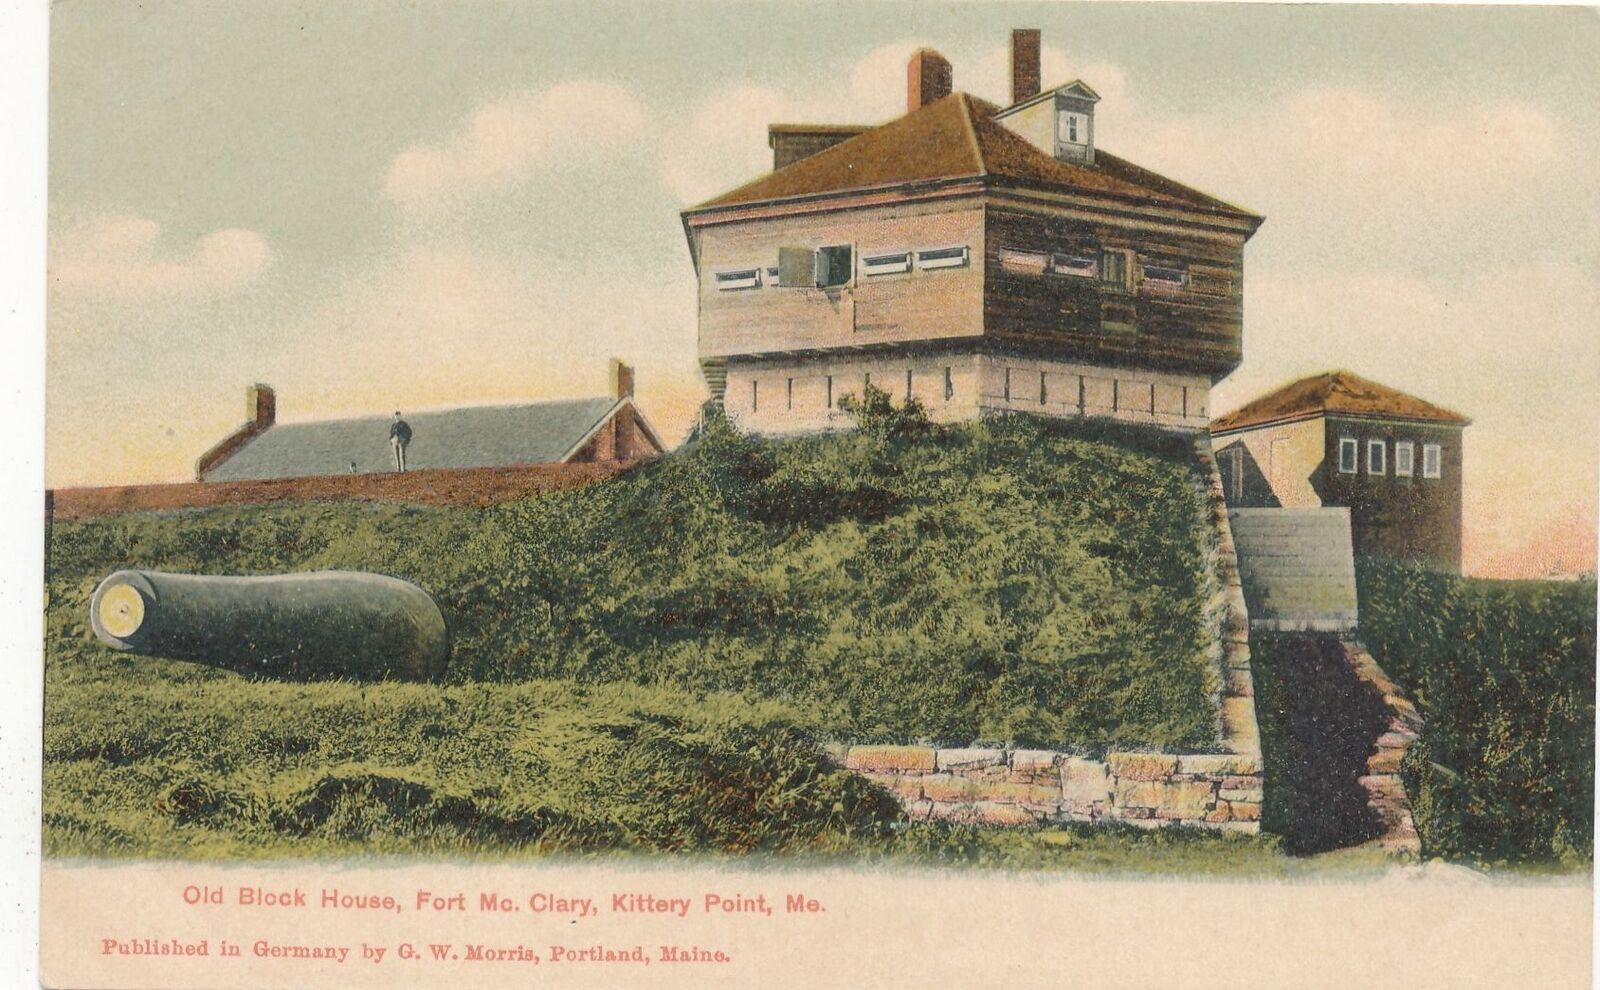 KITTERY POINT ME - Fort McClary Old Block House Postcard - udb (pre 1908)